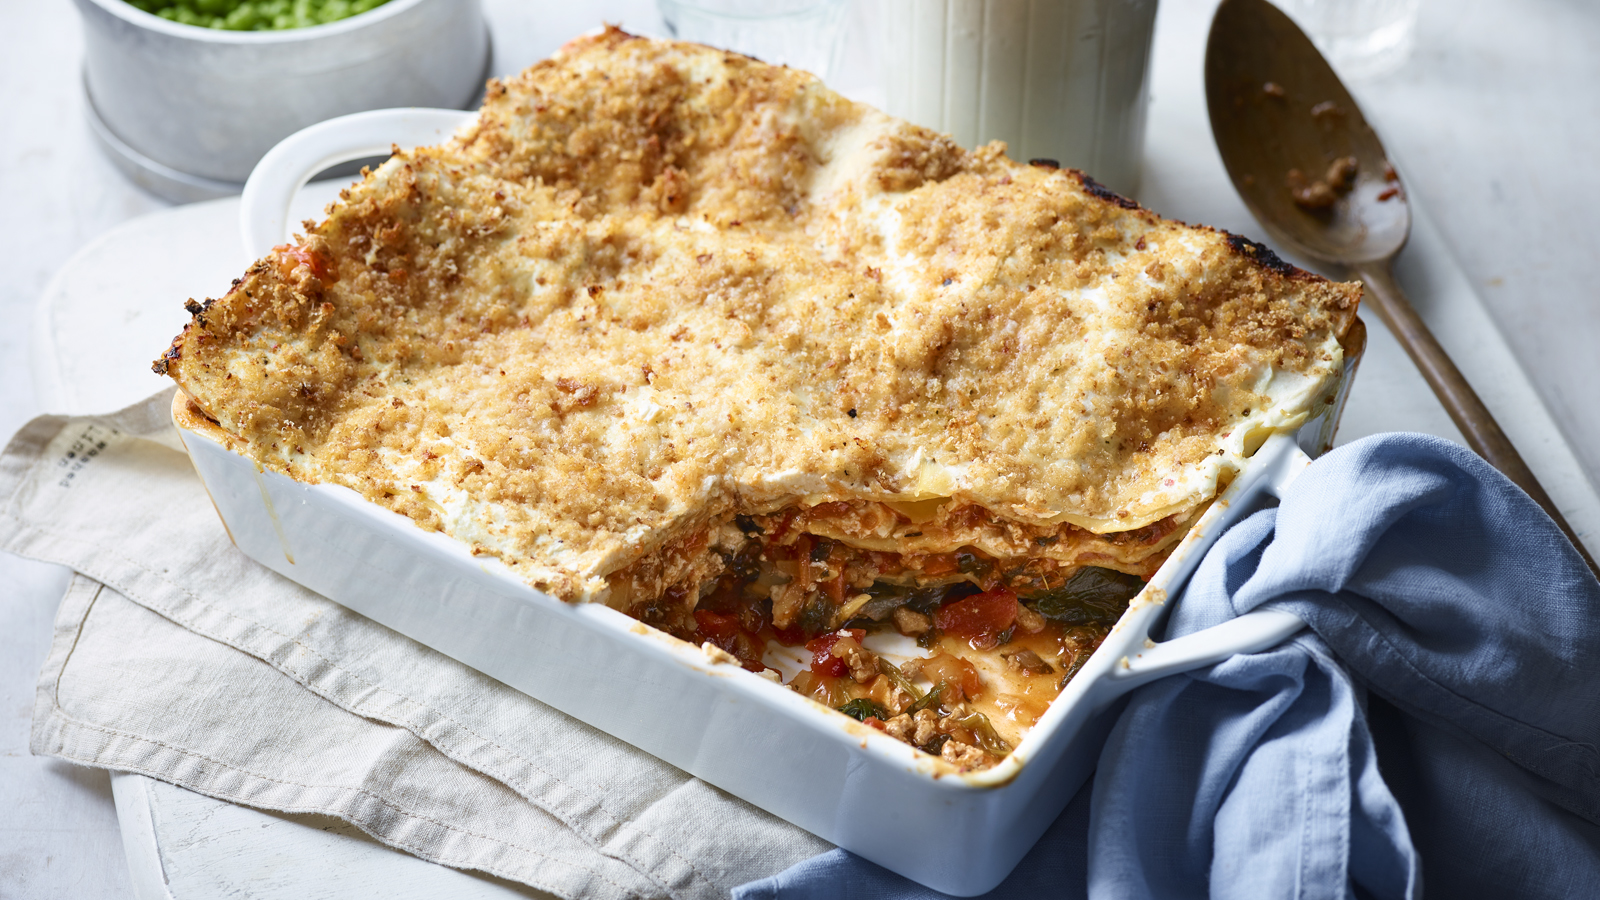 Eat Well For Less turkey lasagne recipe - BBC Food